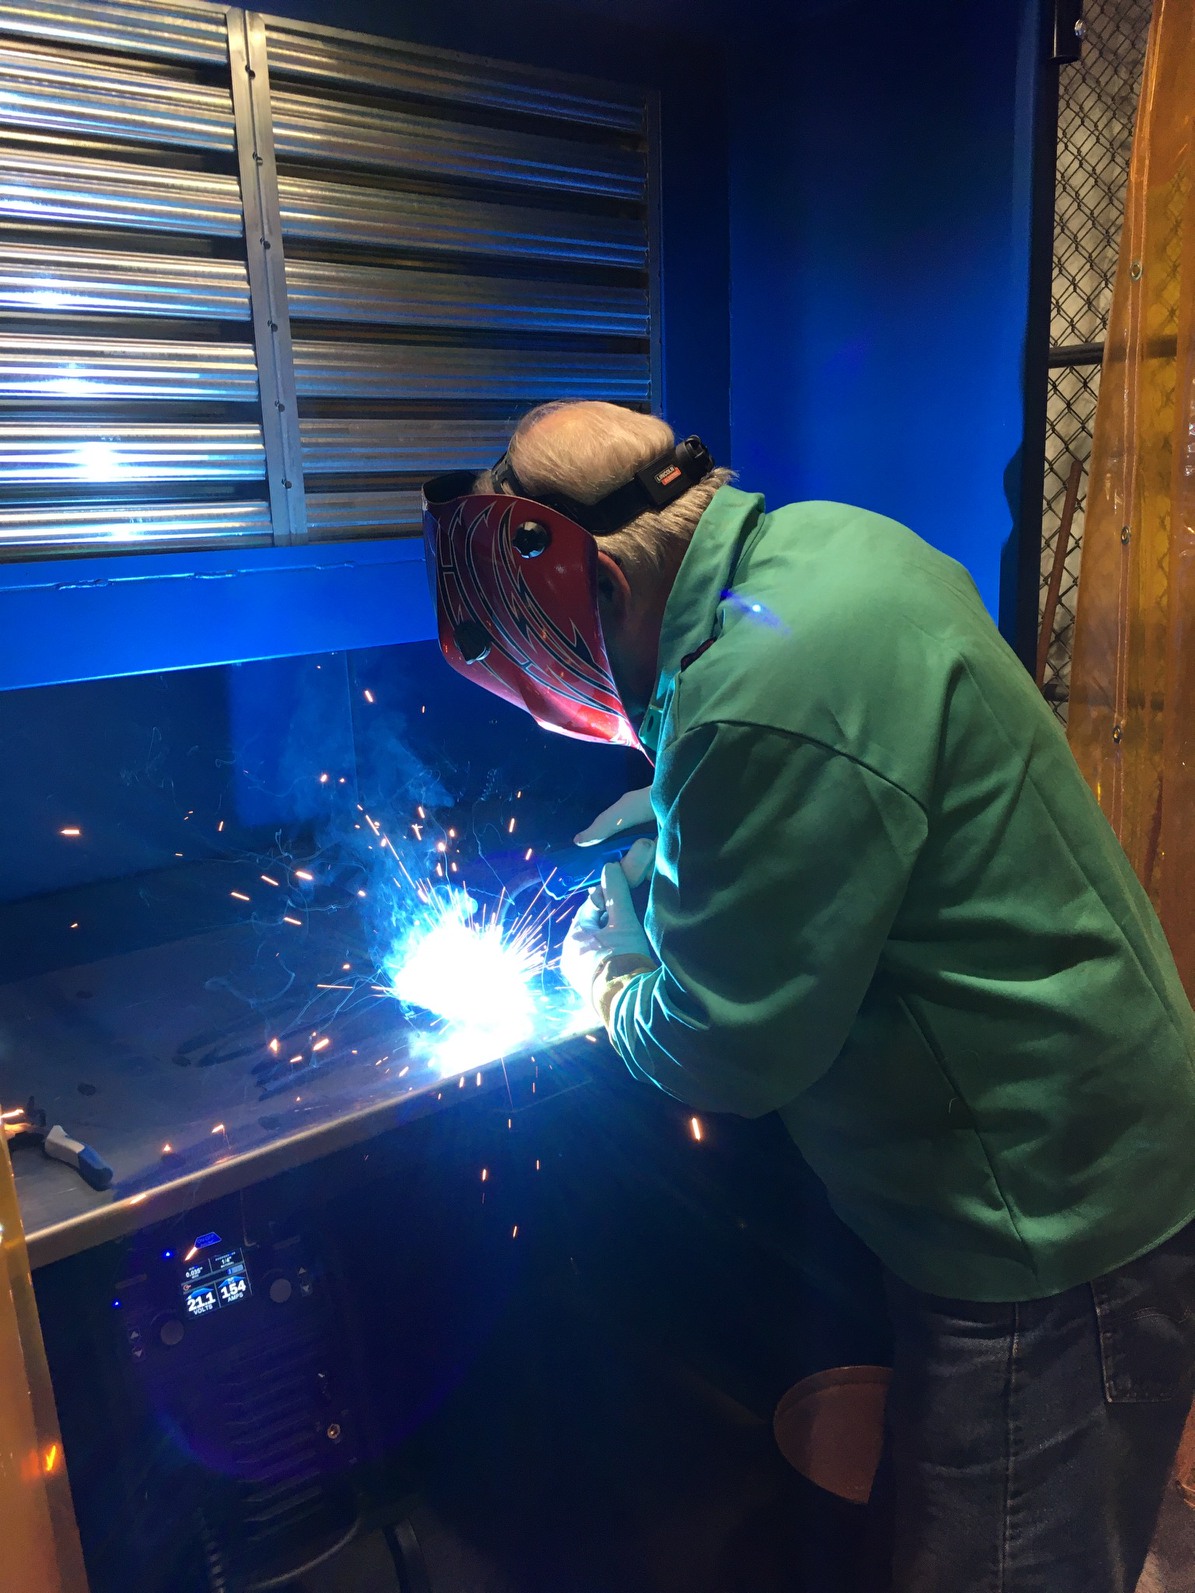 Man with helmet and face shield welding in a booth, with sparks flying.